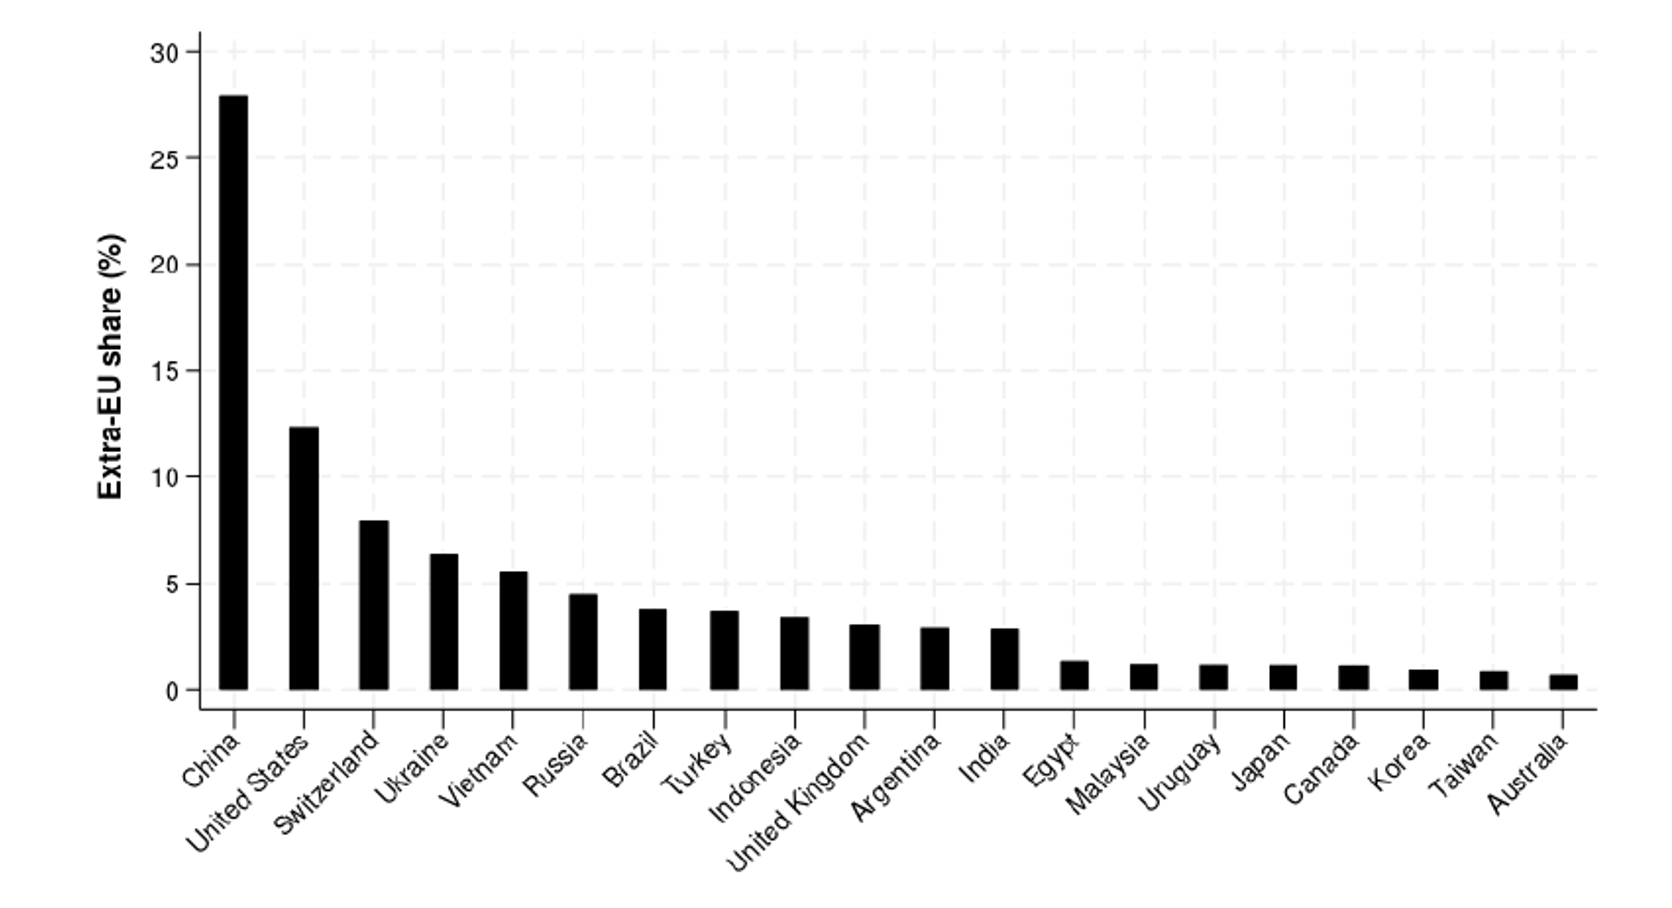 Figure 2 Extra-EU import share of FDPs by source country